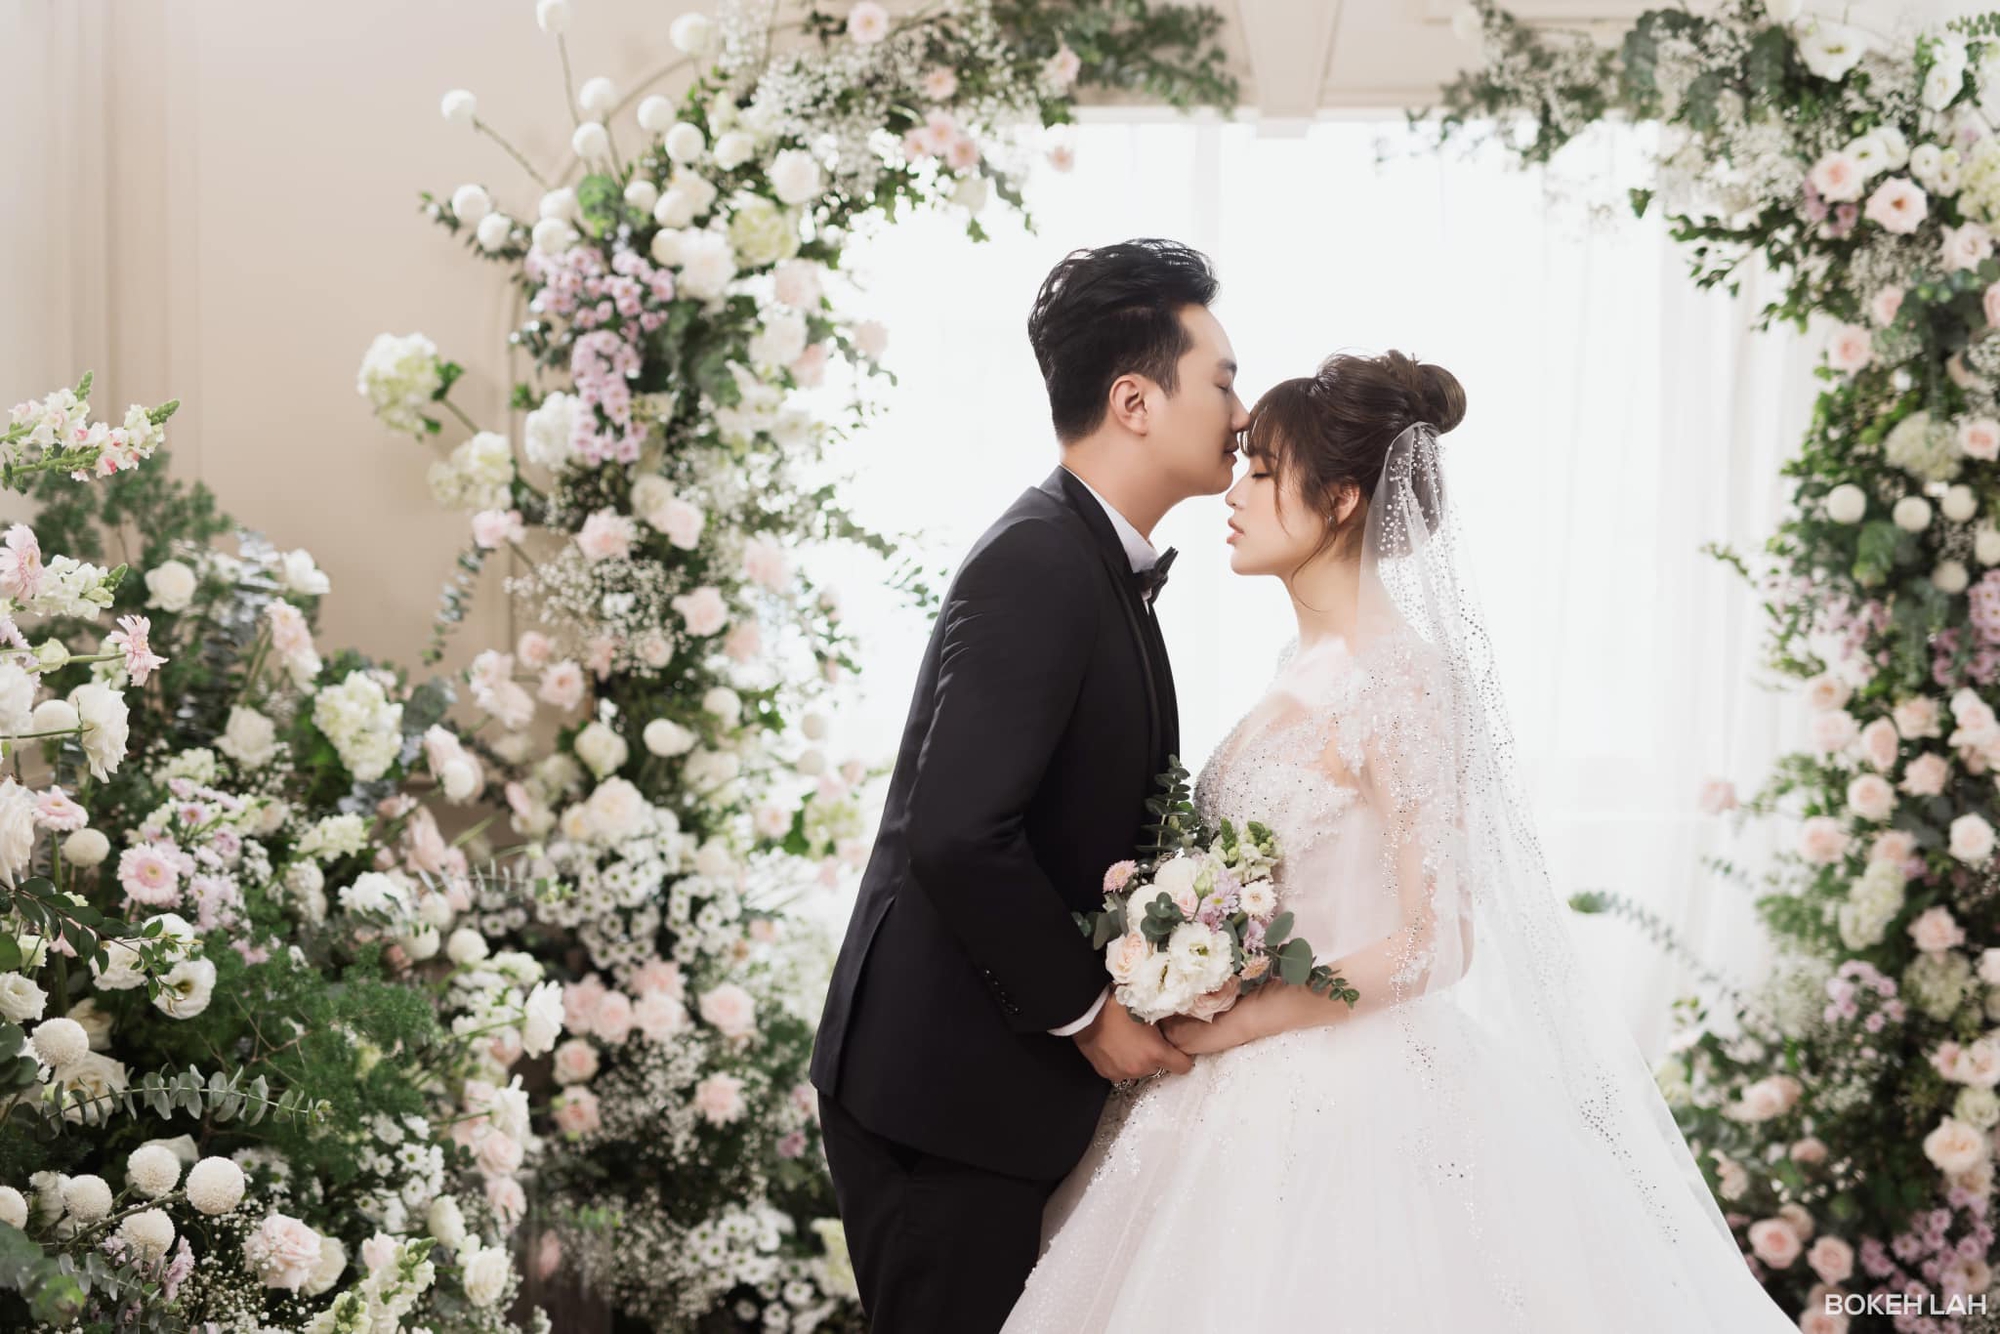 Male star Vbiz released a dream-like wedding photo before G: The groom has a brilliant style, the beauty of his girlfriend 2K1 causes a fever - Photo 7.